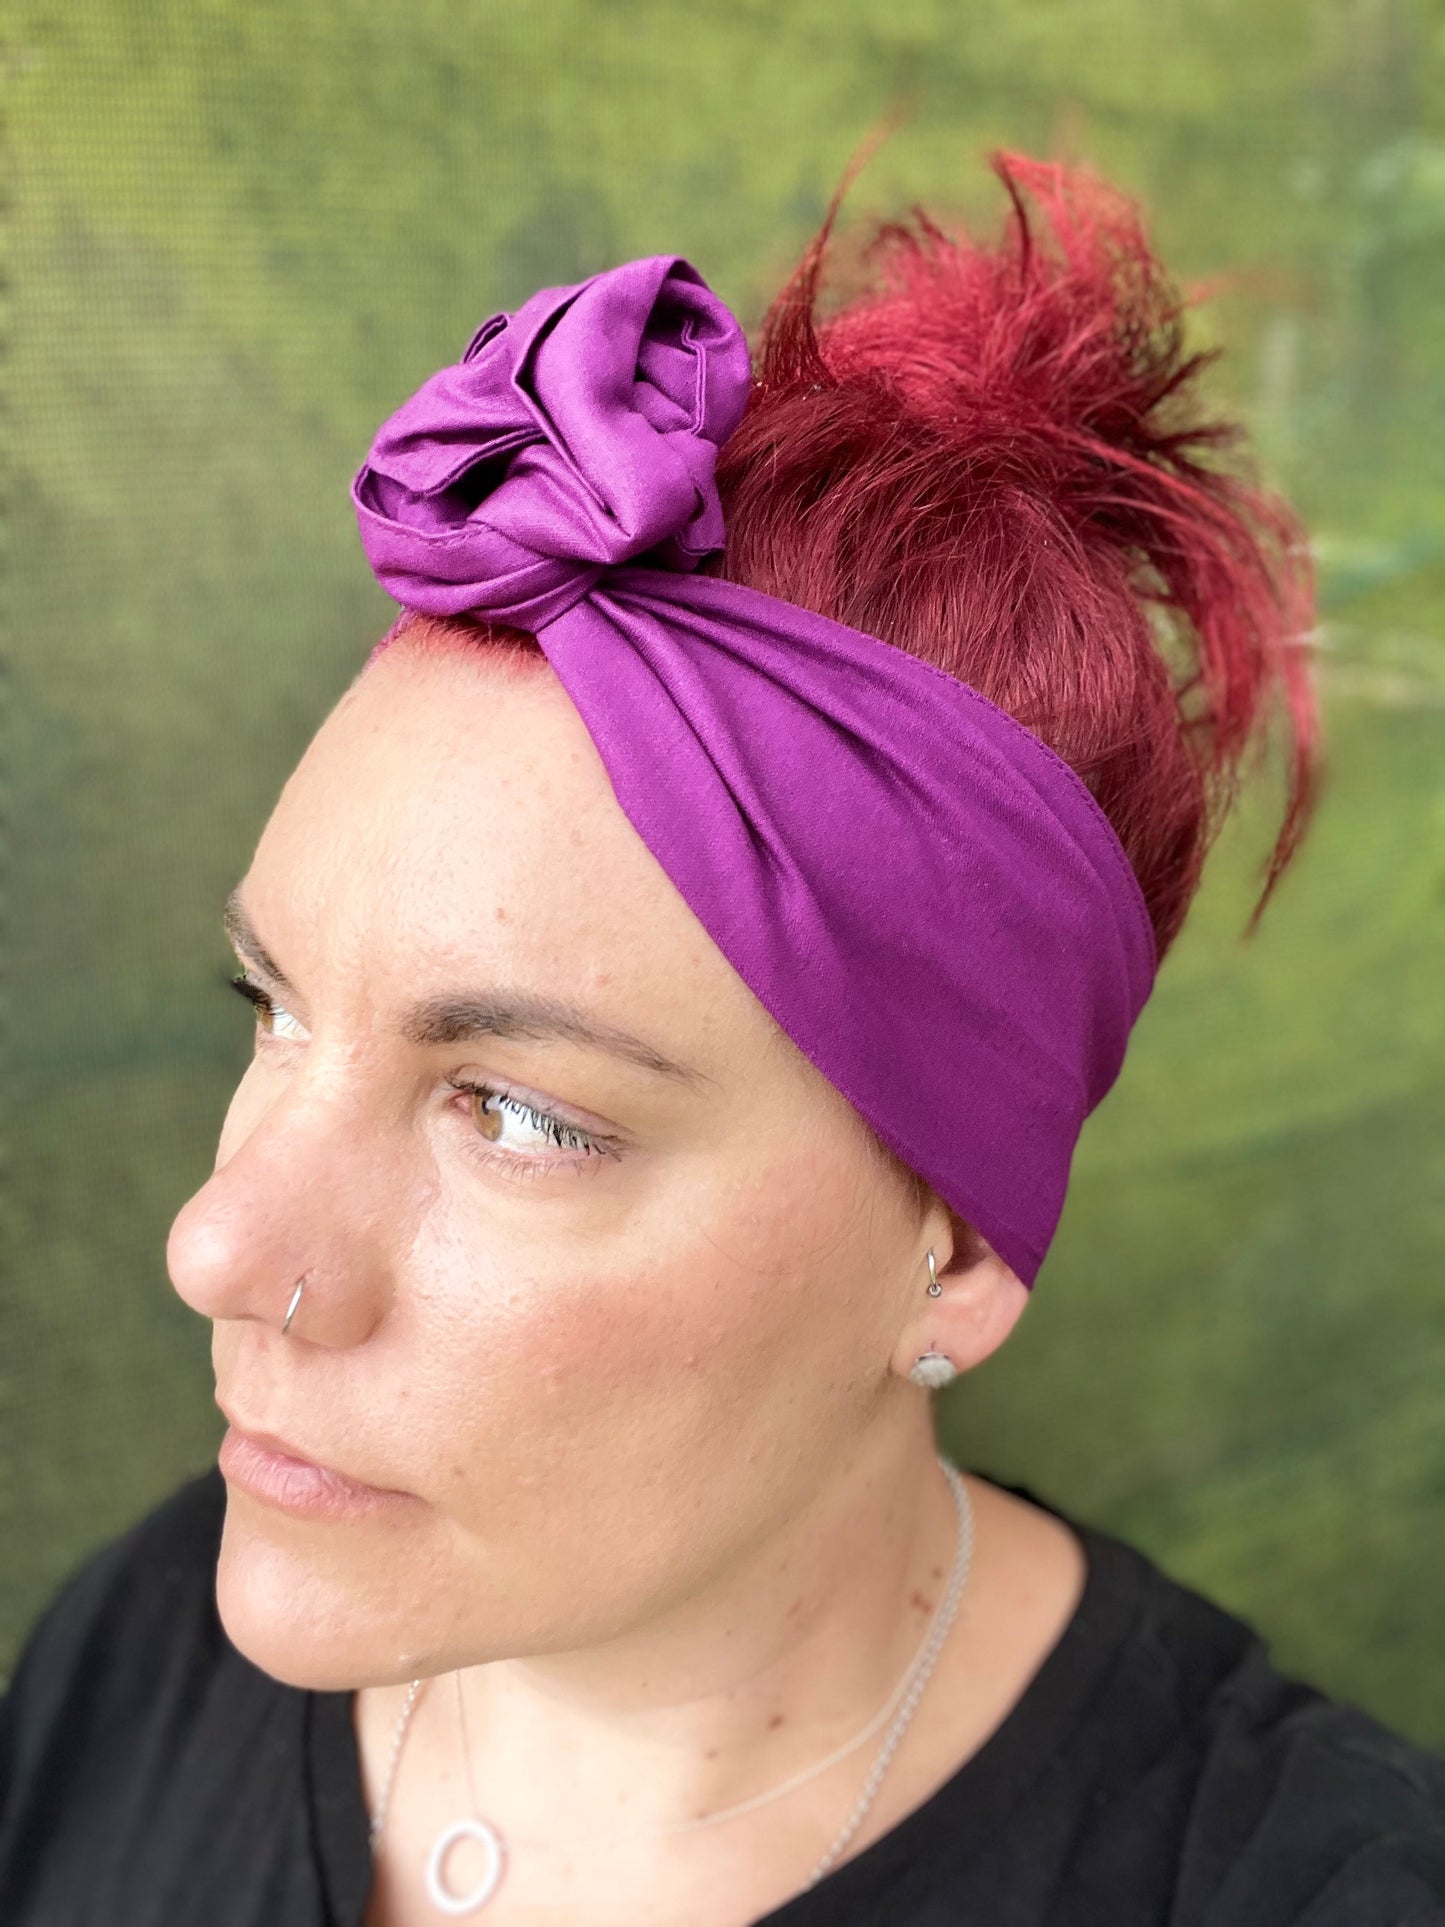 Deep Purple Boho Wire Headband - Bae Bands Australia Twist Bow Wire Headband allows for your headband to stay in place all day with no headaches,